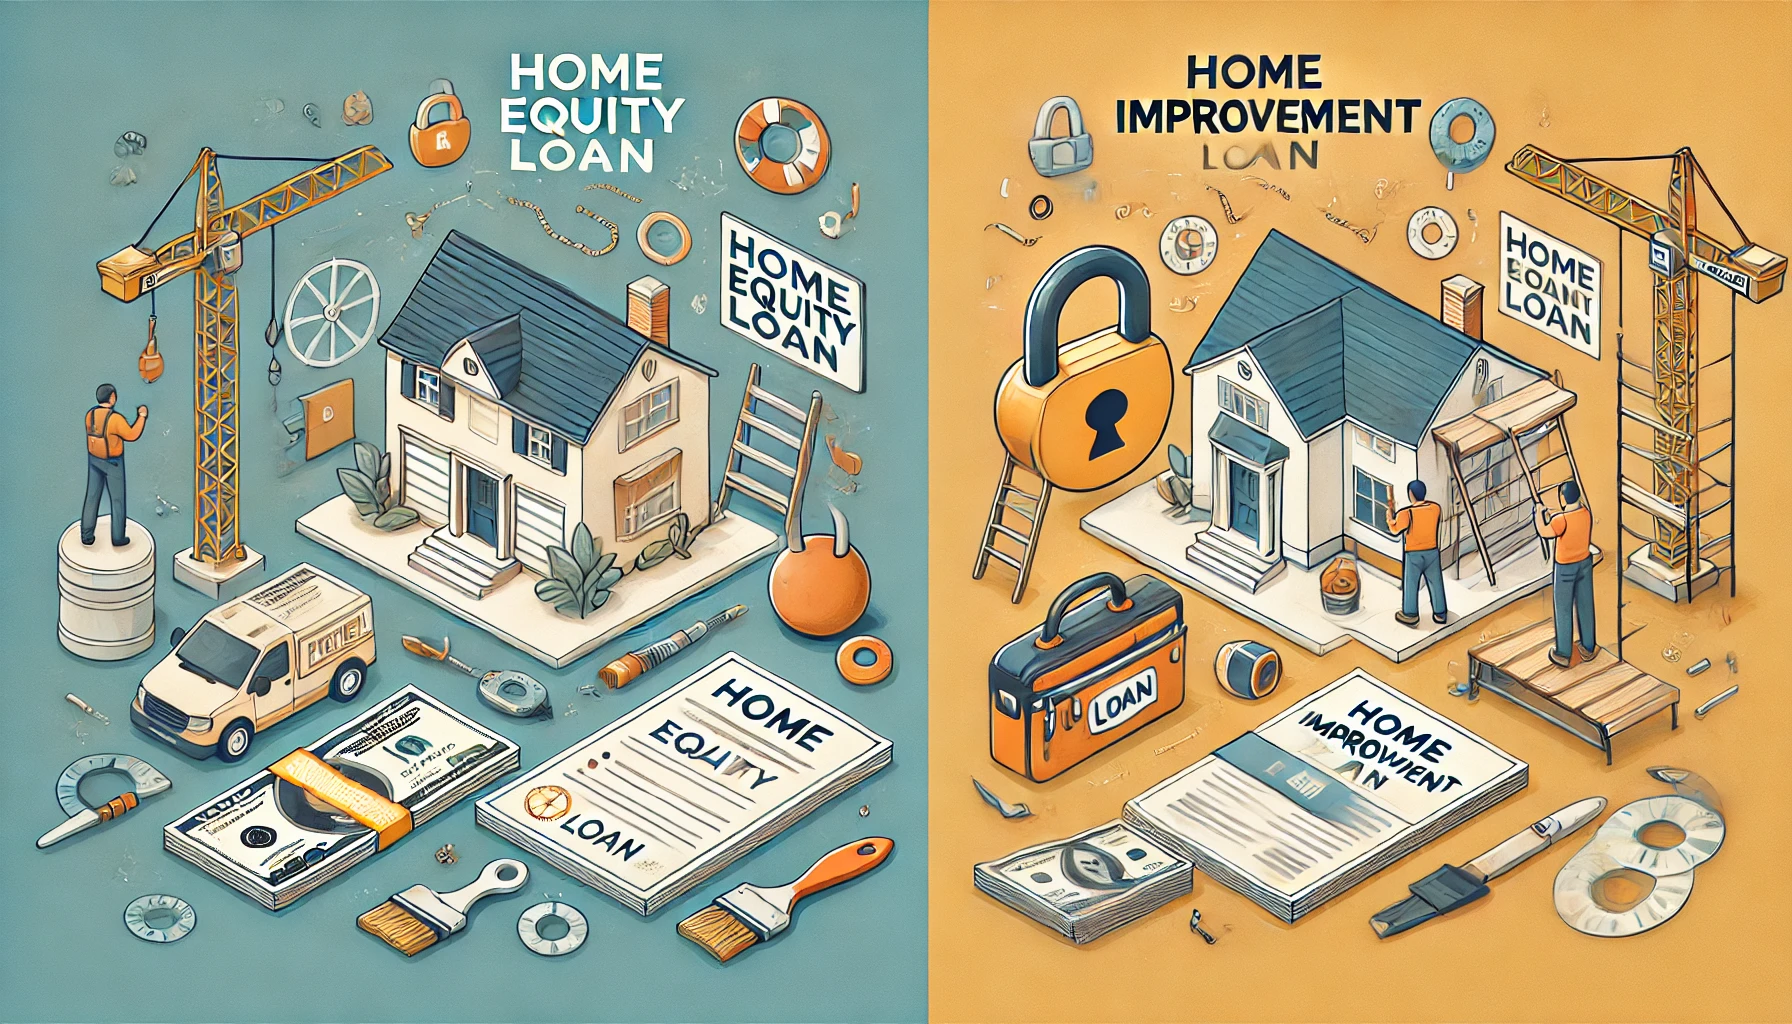 Home Equity Loan vs. Home Improvement Loan: What’s the Difference?